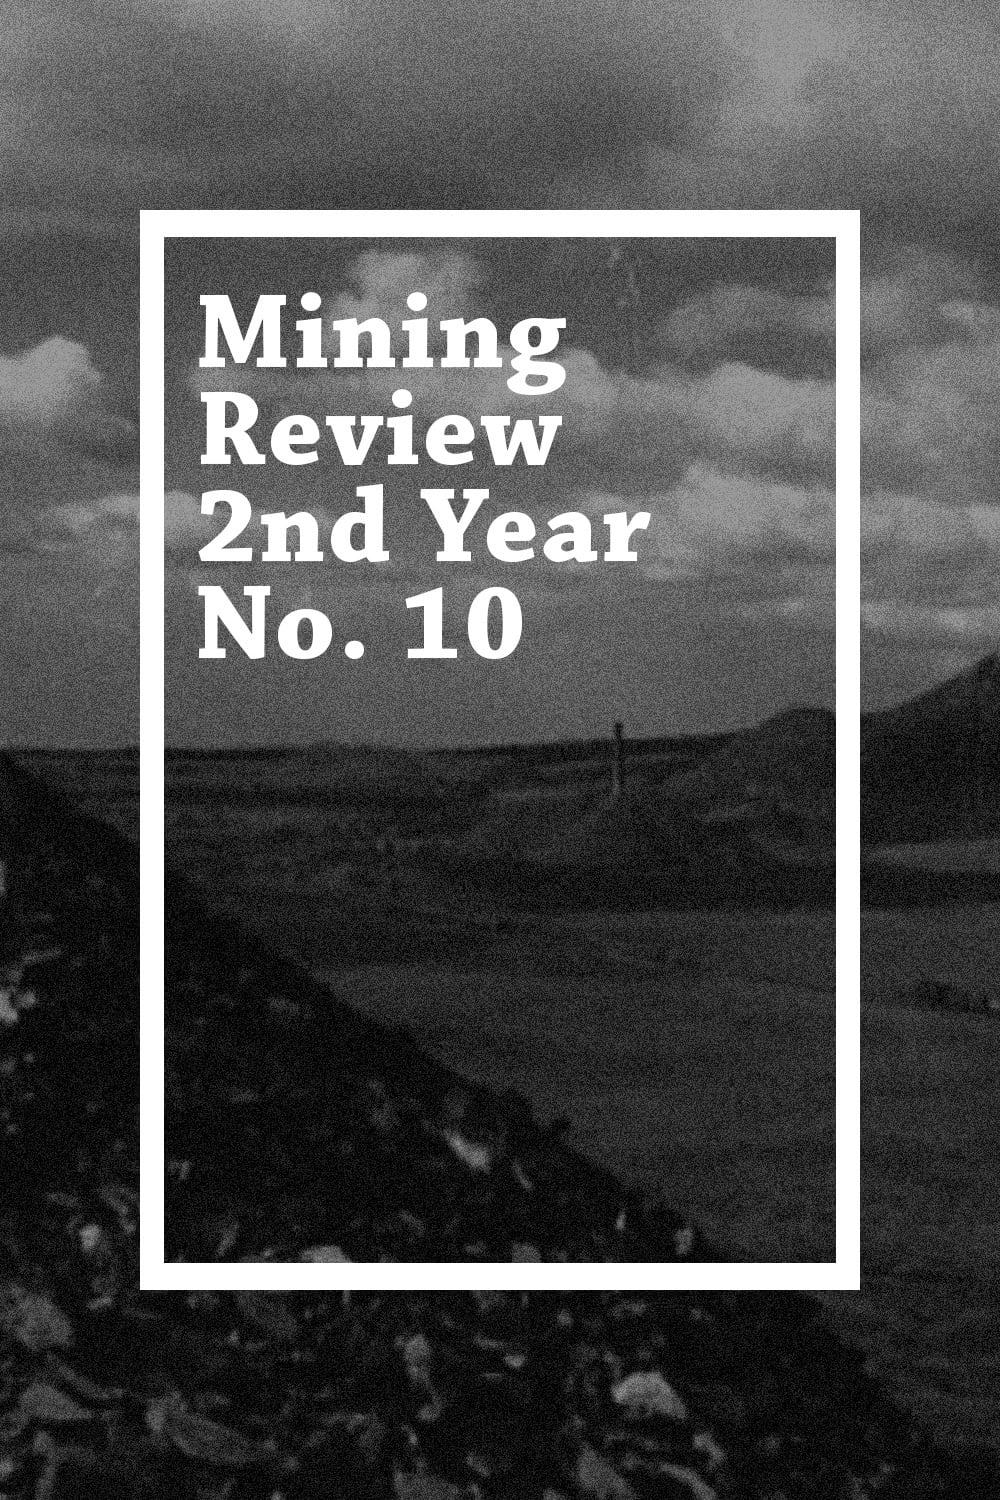 Mining Review 2nd Year No. 10